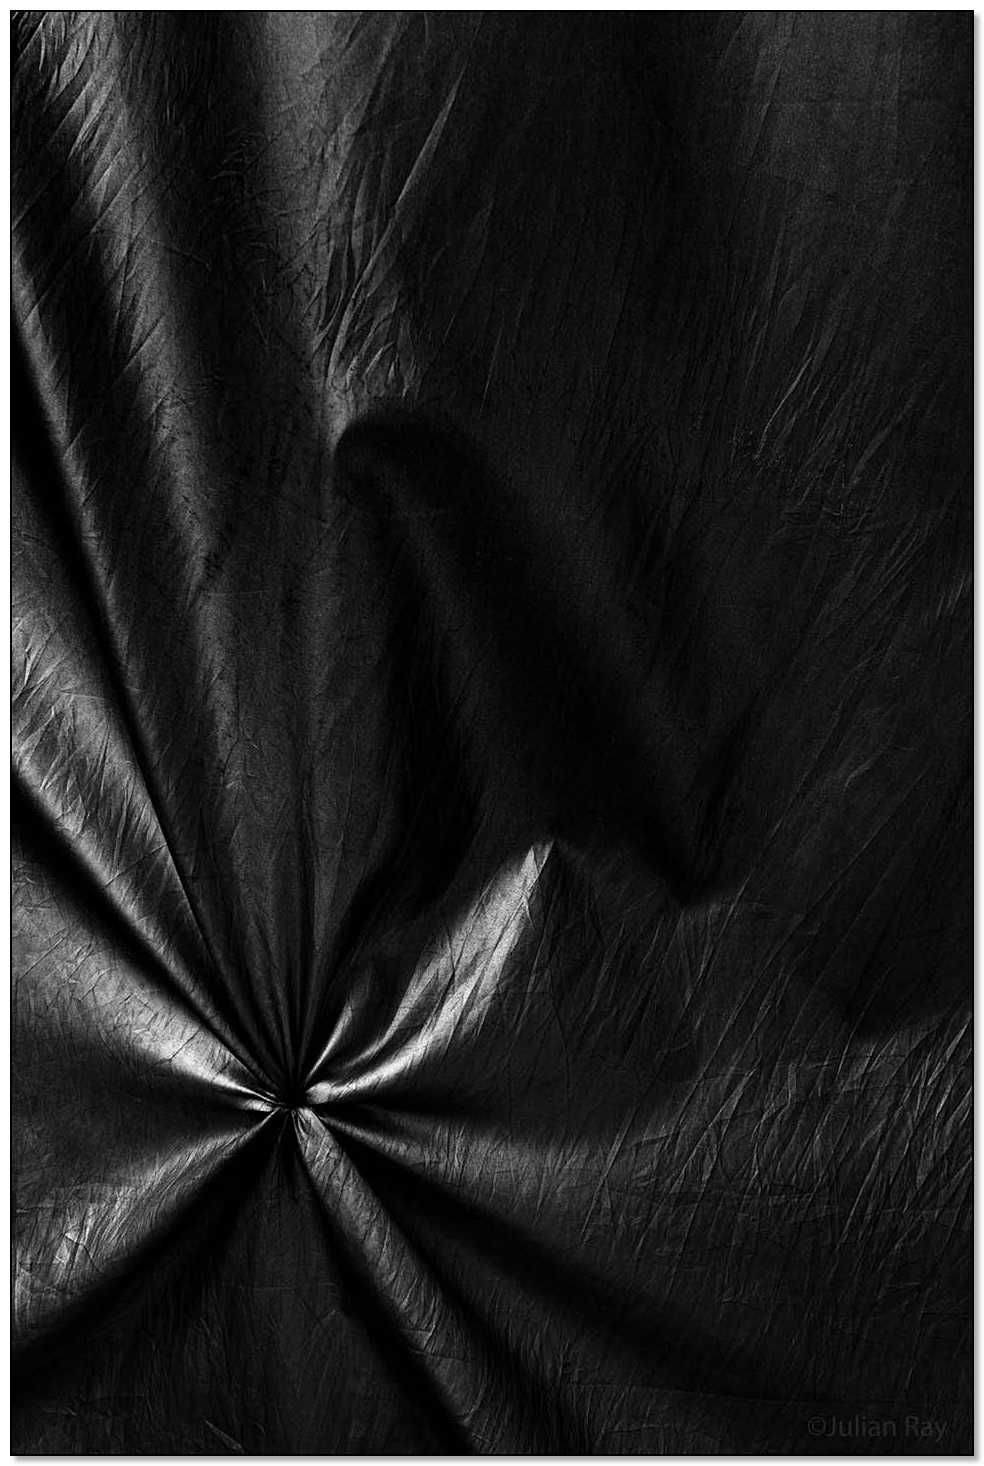 lines in fabric in black and white